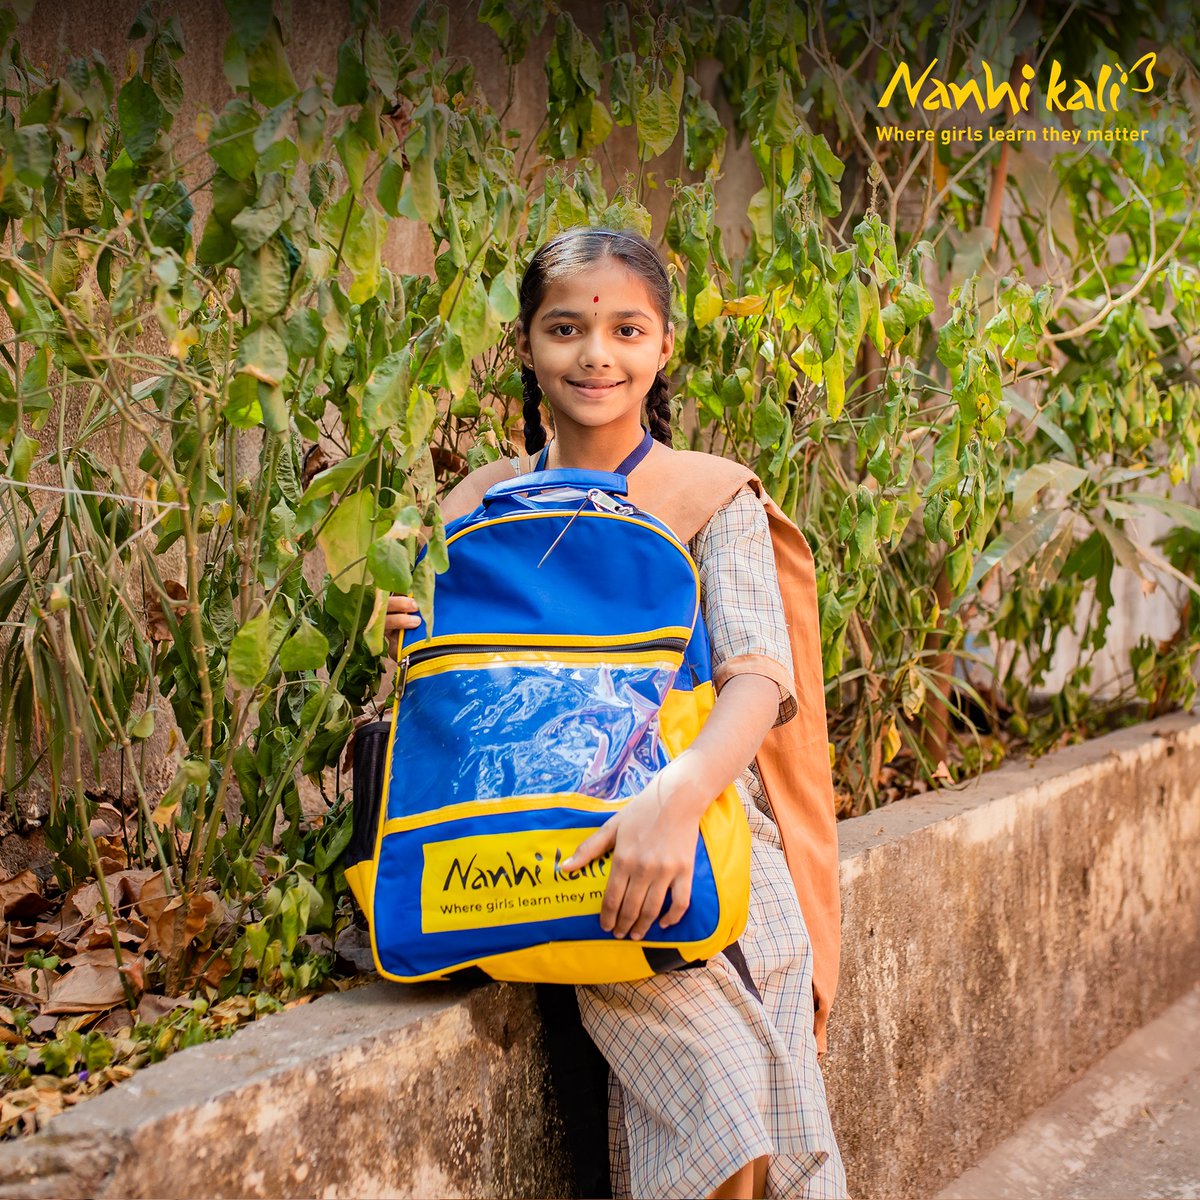 Your donation helps create a world where every girl has the opportunity to learn, grow and thrive! Help support underprivileged girls in their educational journey, visit nanhikali.org #NanhiKali #WhereGirlsLearnTheyMatter #EveryGirlMatters